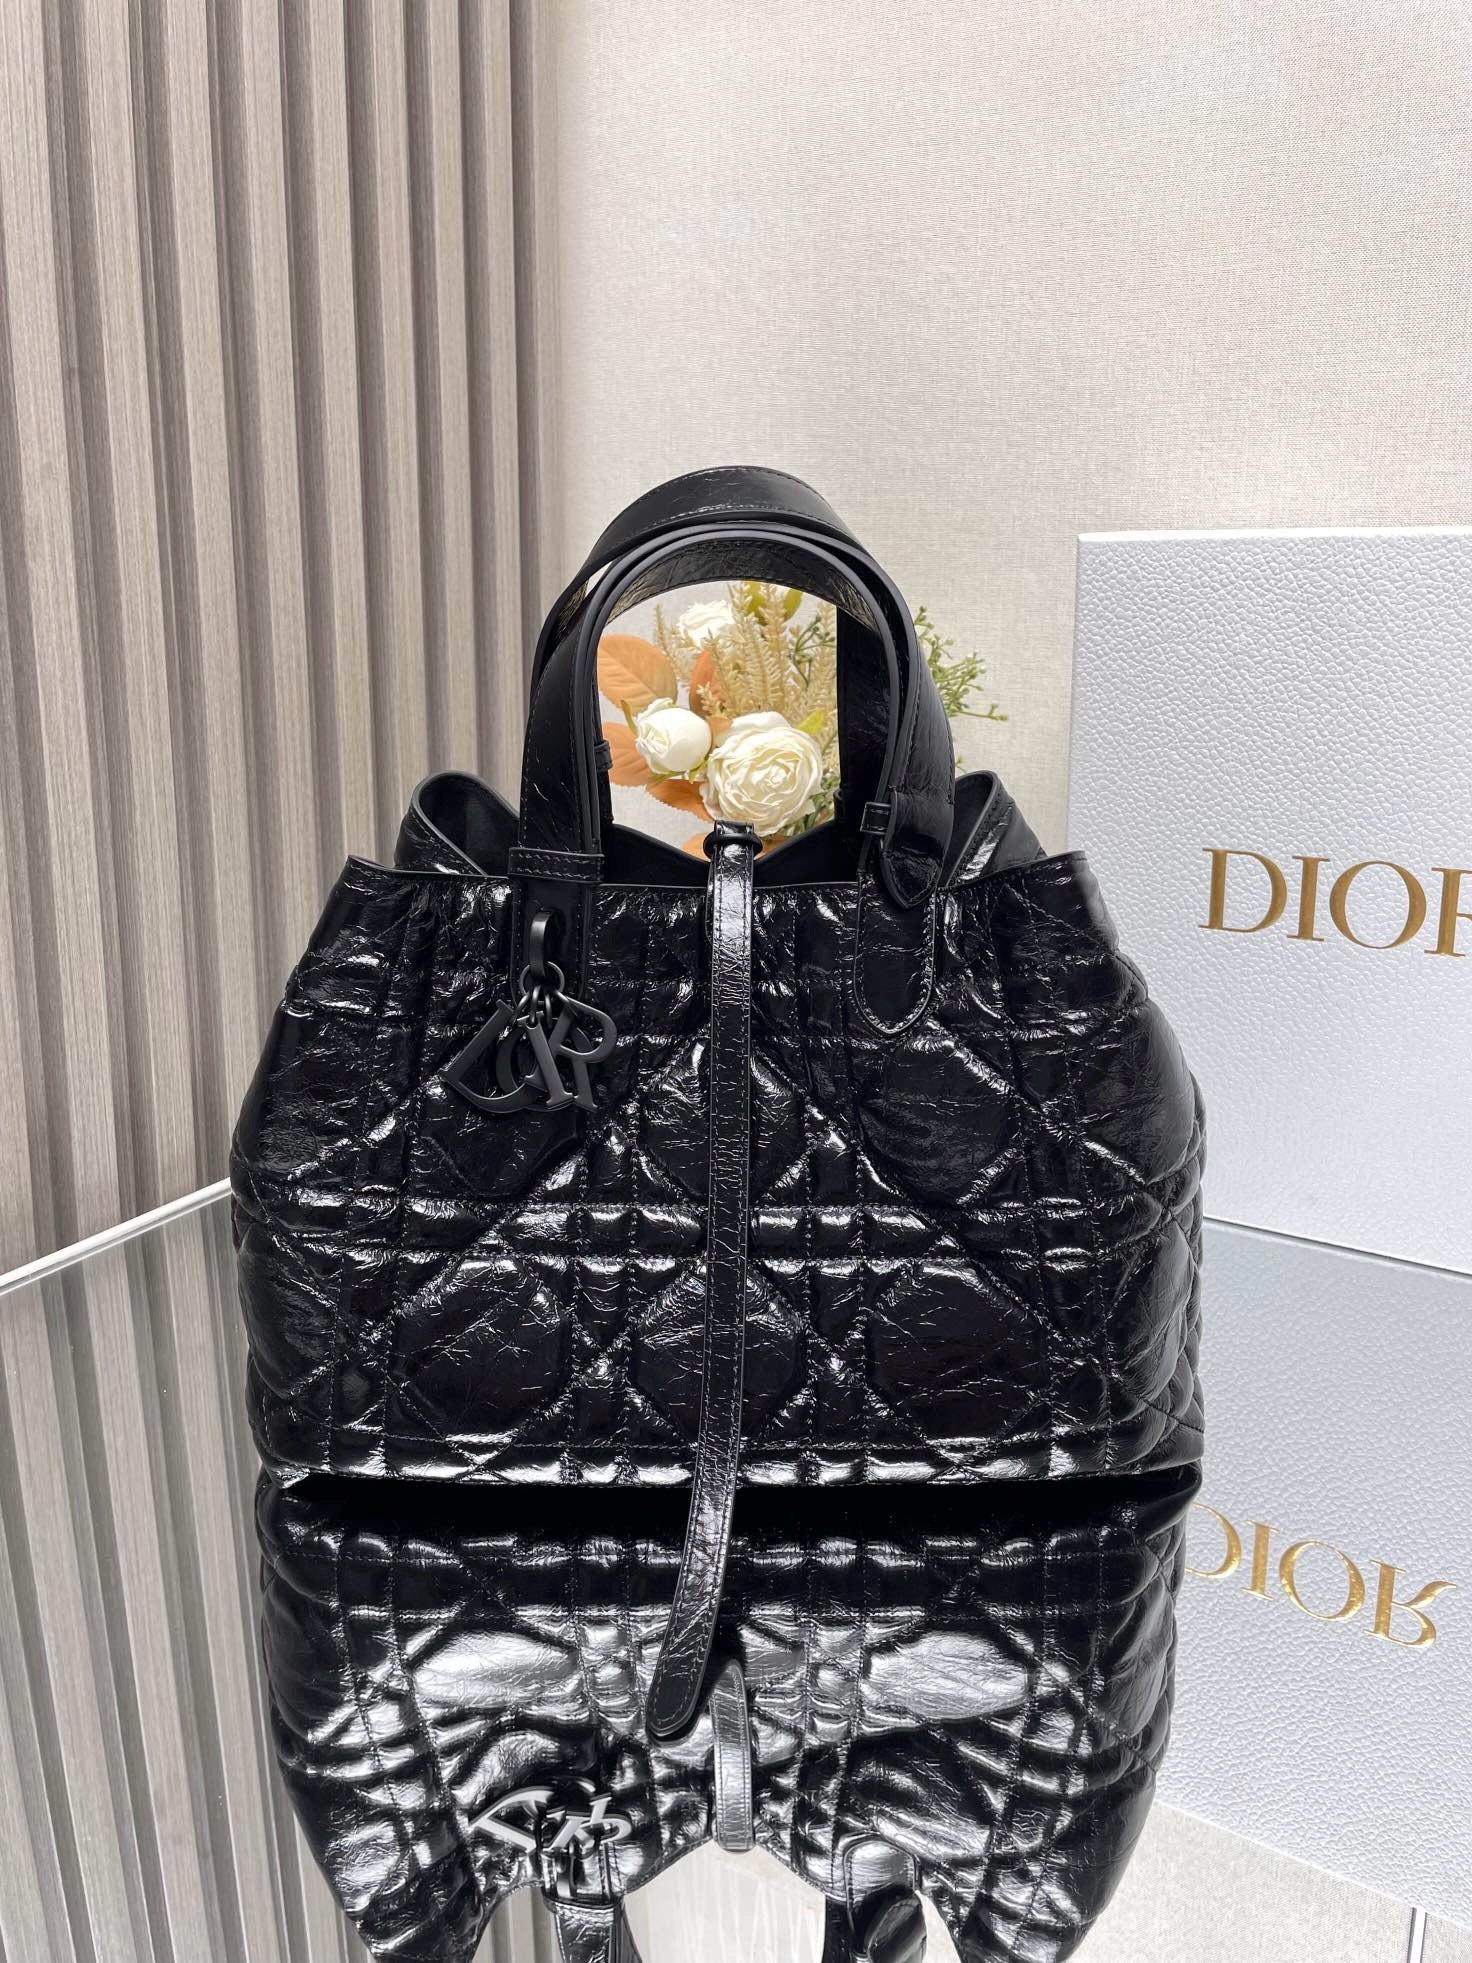 Dior Buy
 Bags Handbags Replica US
 Black Cowhide Oil Wax Leather Spring/Summer Collection Casual